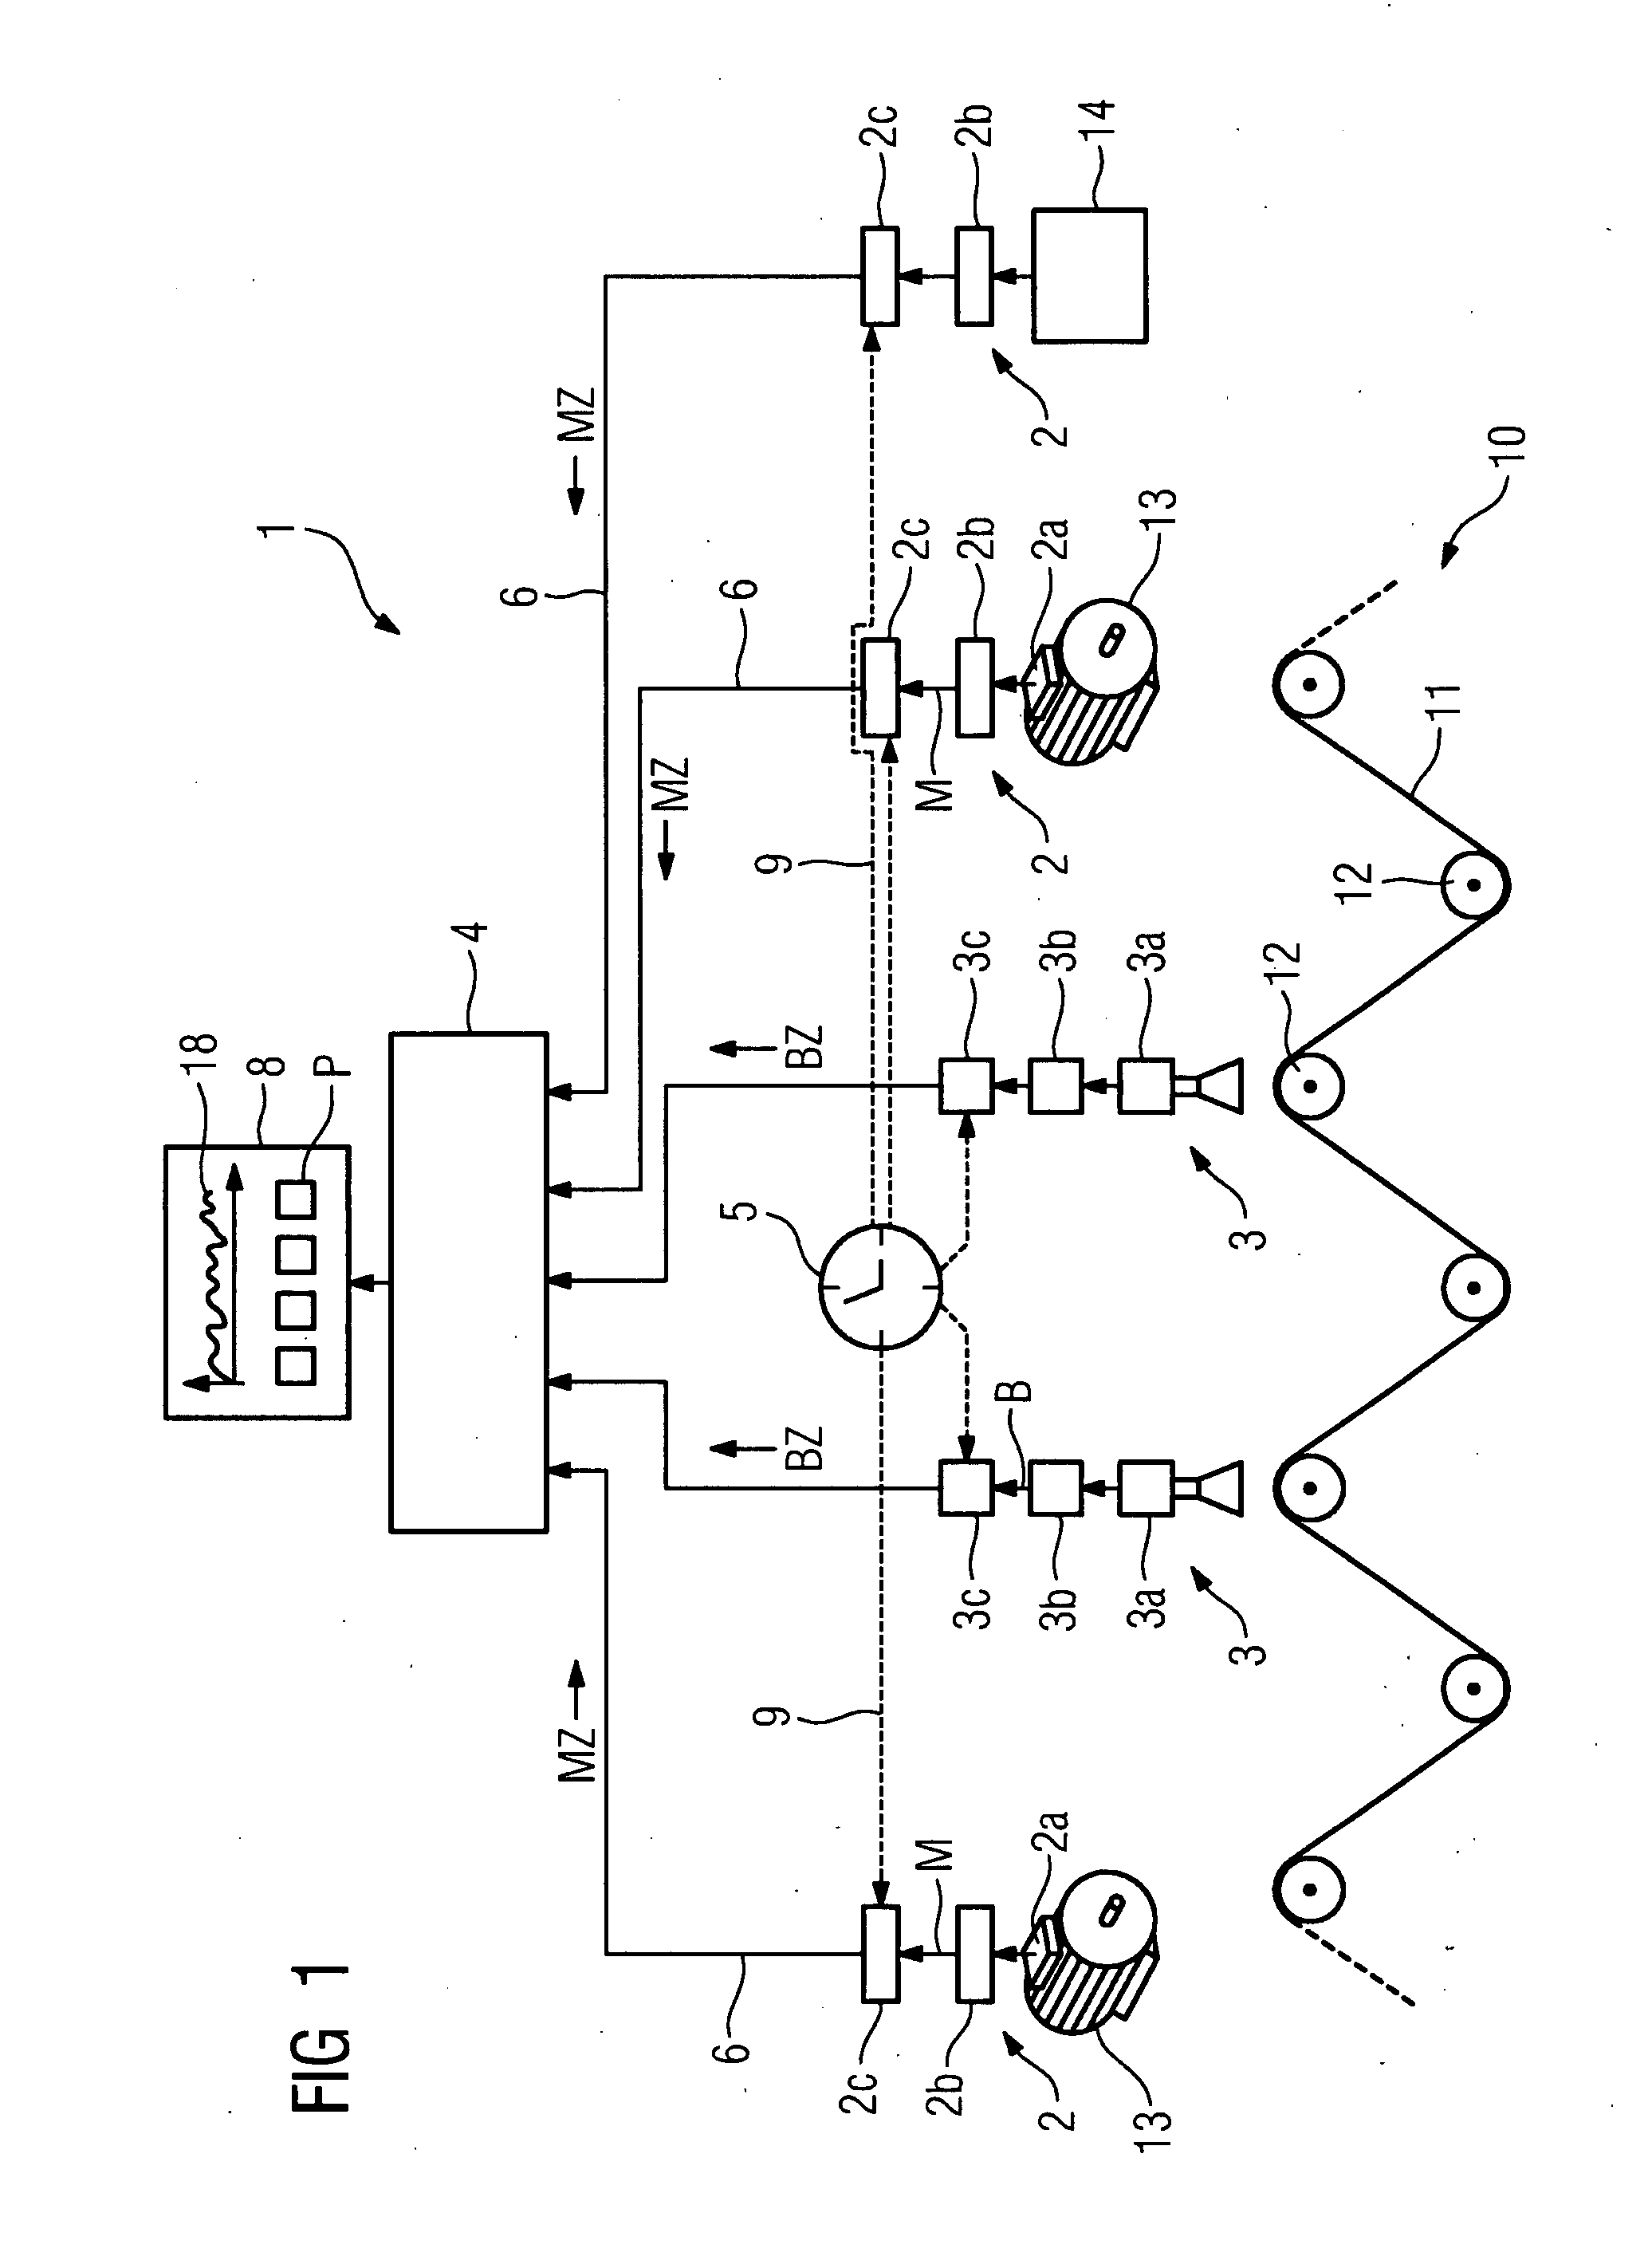 Method and Device For Analyzing a Technical Process